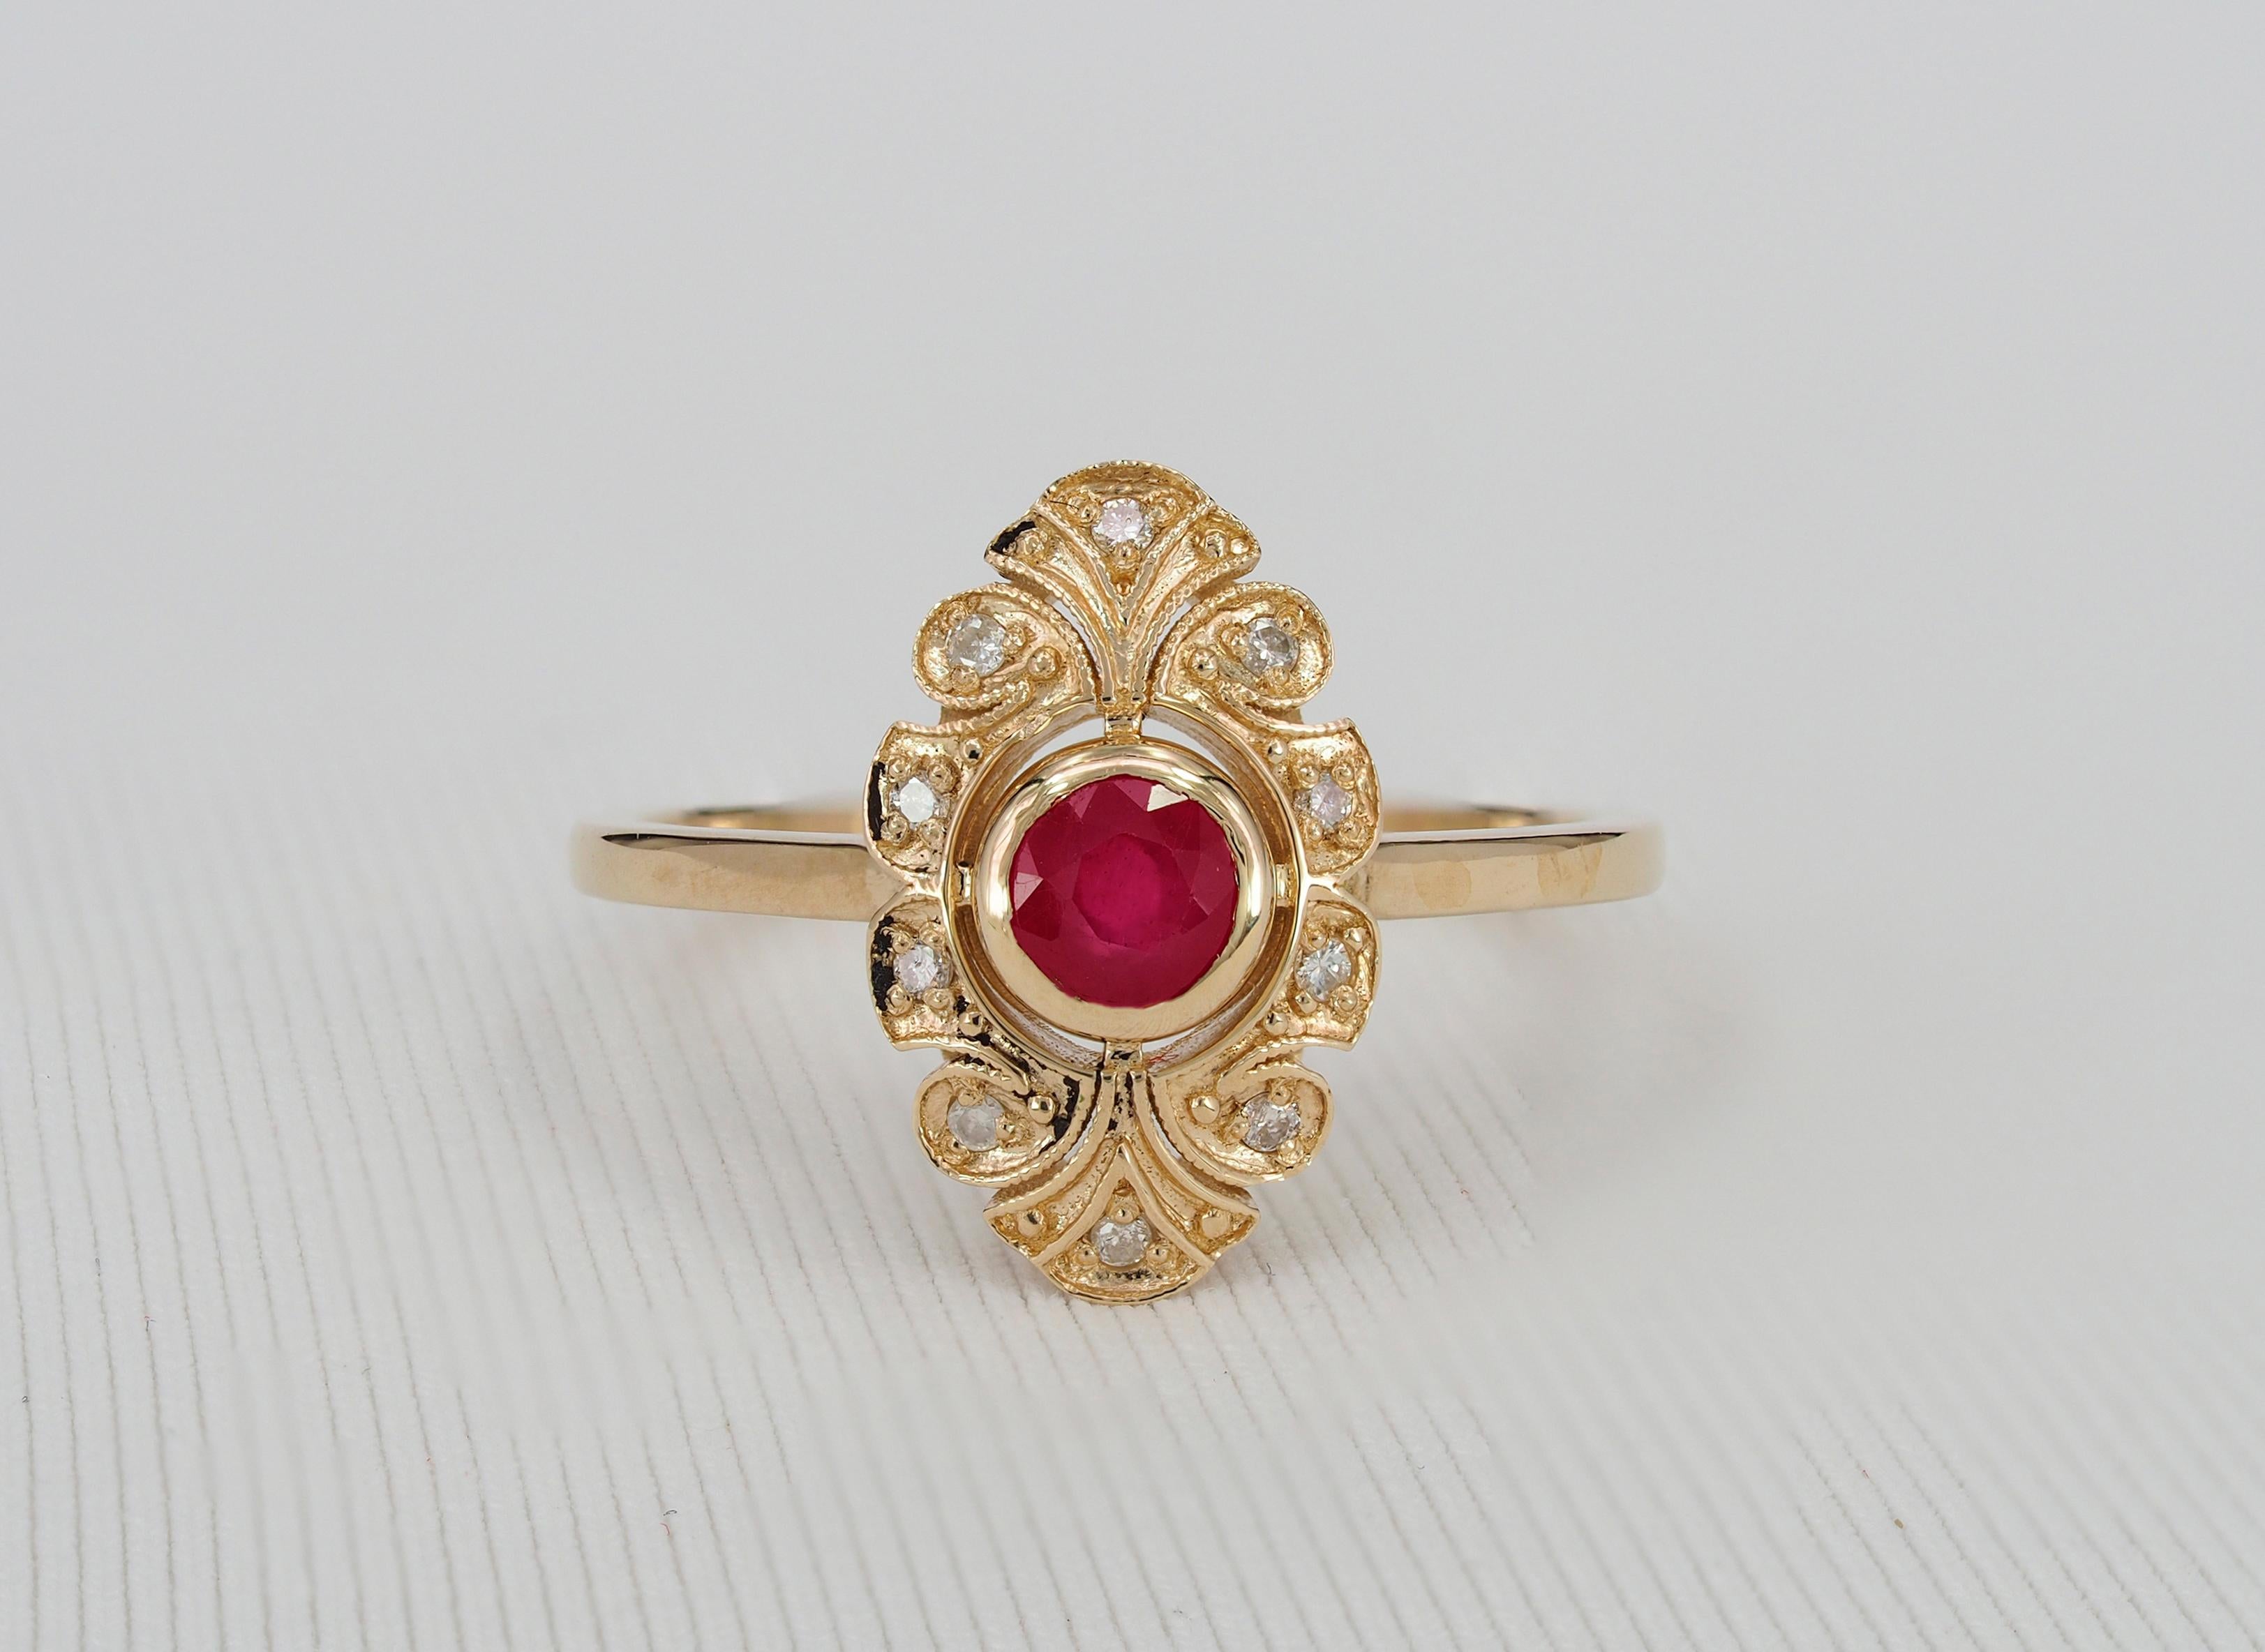 For Sale:  14 karat Gold Ring with Ruby and Diamonds, Vintage Inspired Ring.  3